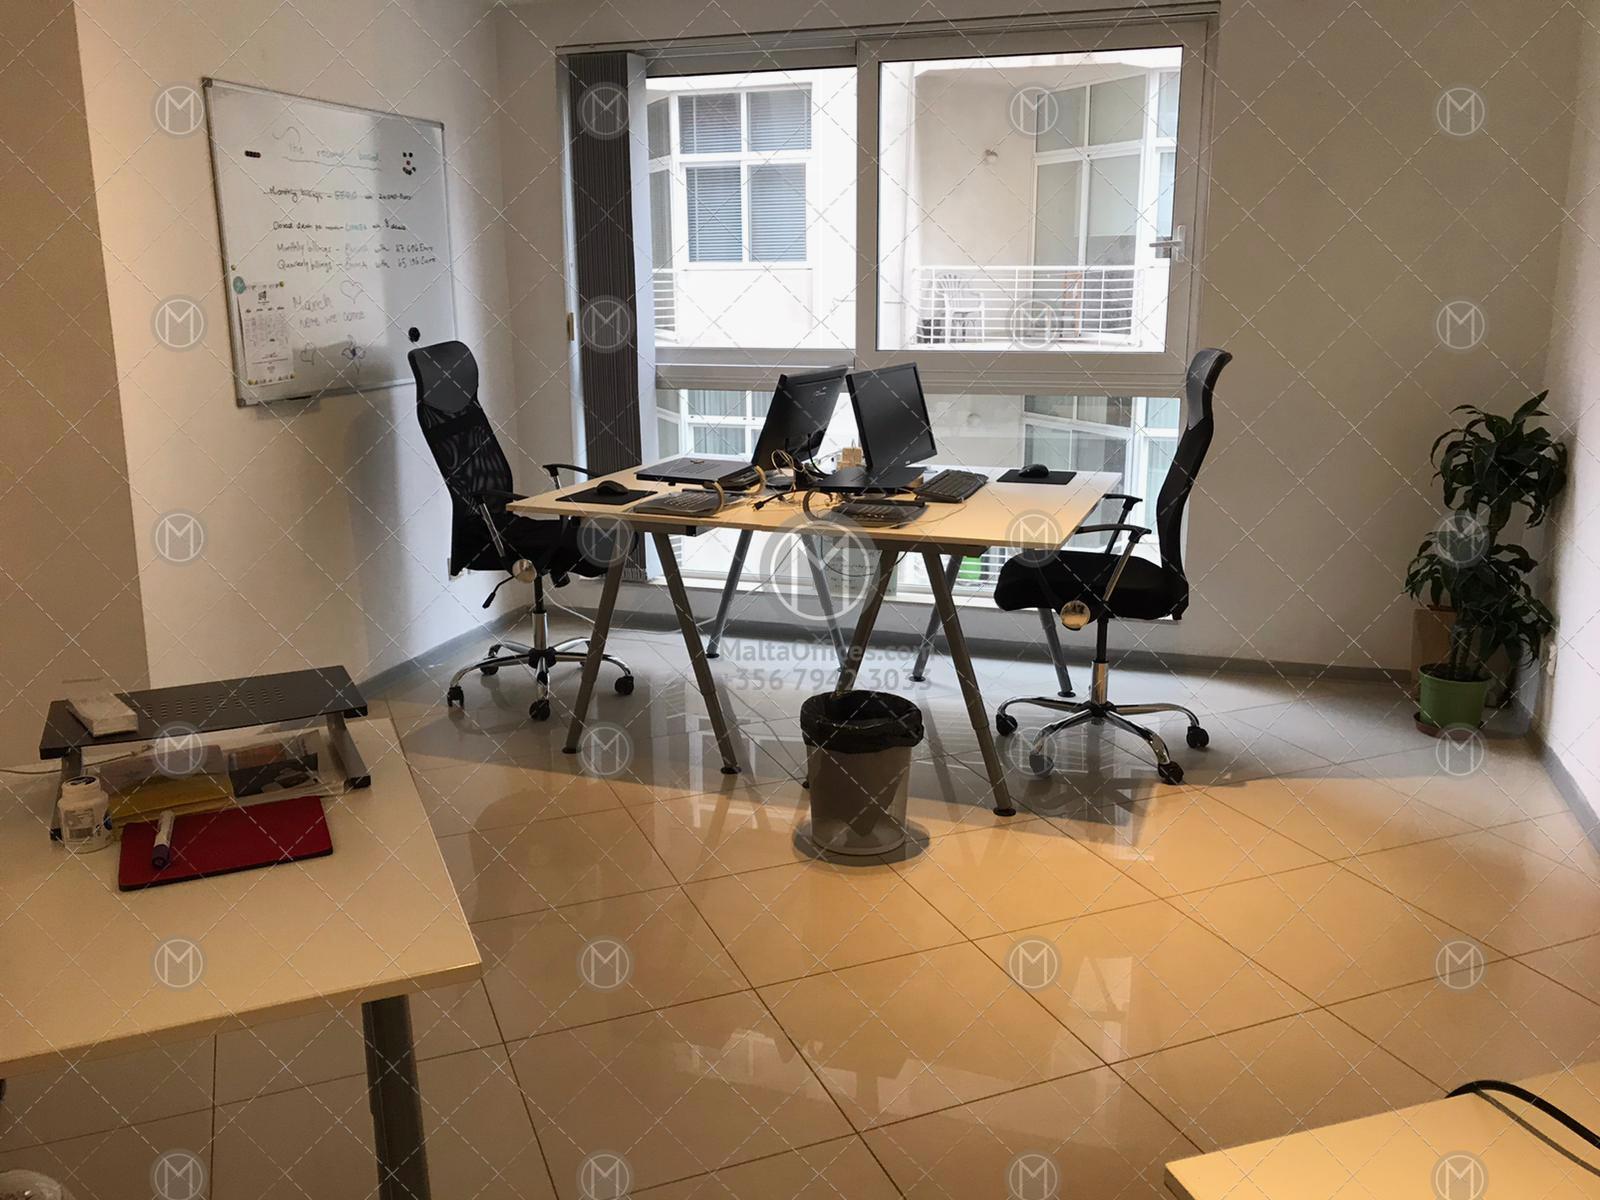 Furnished Offices in Sliema for rent (55 sqm) - Maltaoffices.com